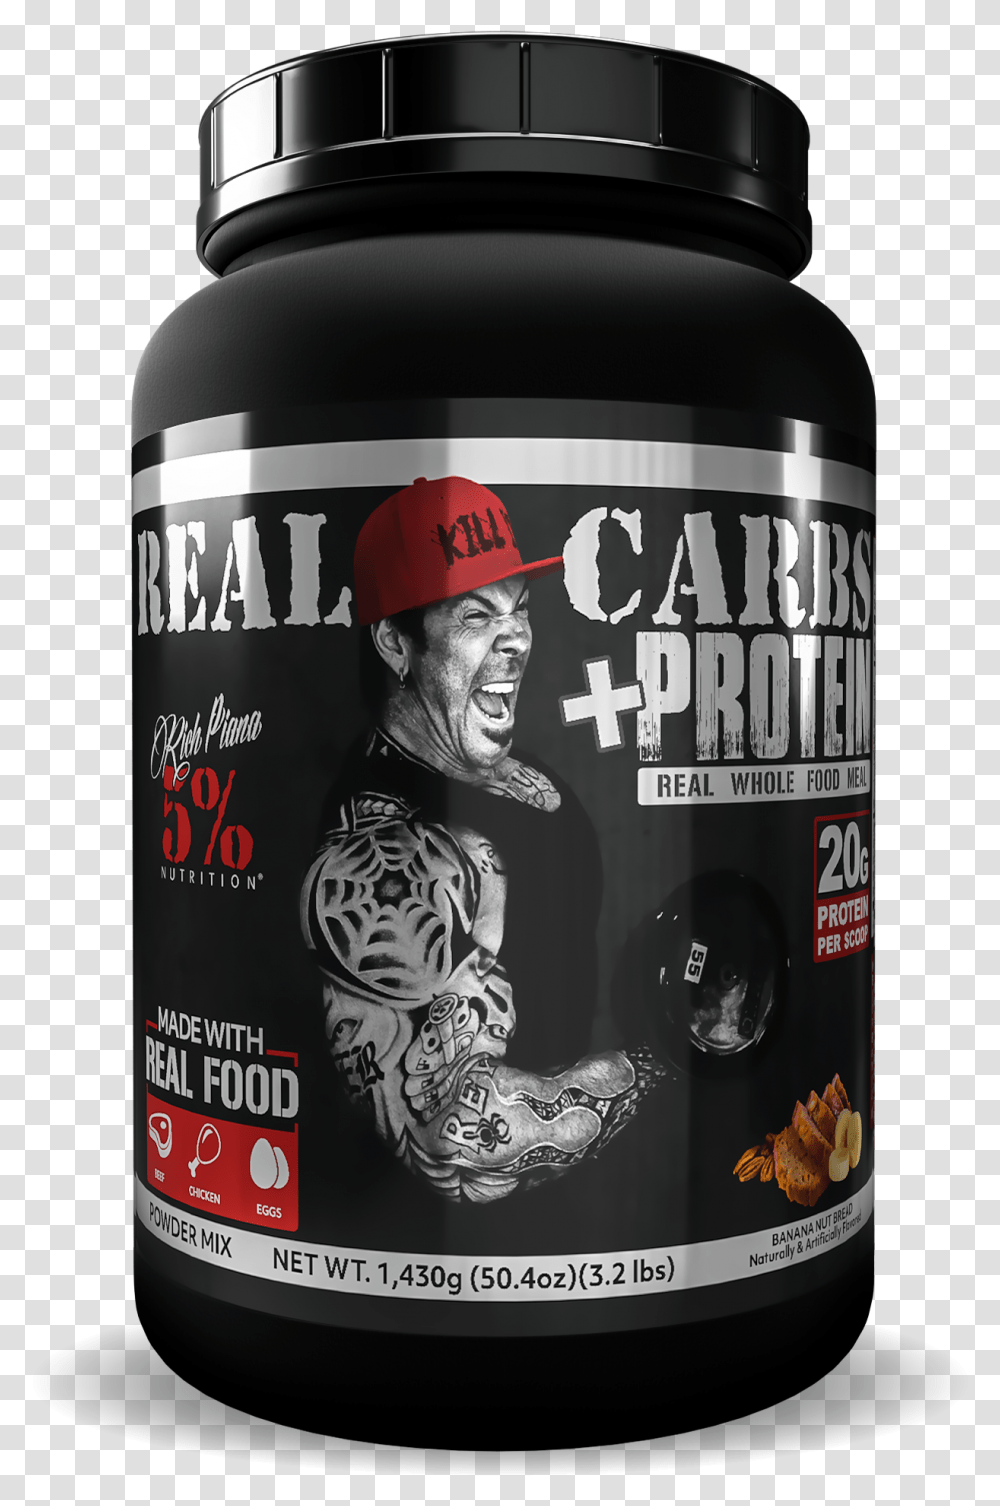 Real Carbs ProteinData Max Width 2000Data Max 5 Real Carbs Protein, Person, Alcohol, Beverage, Tin Transparent Png